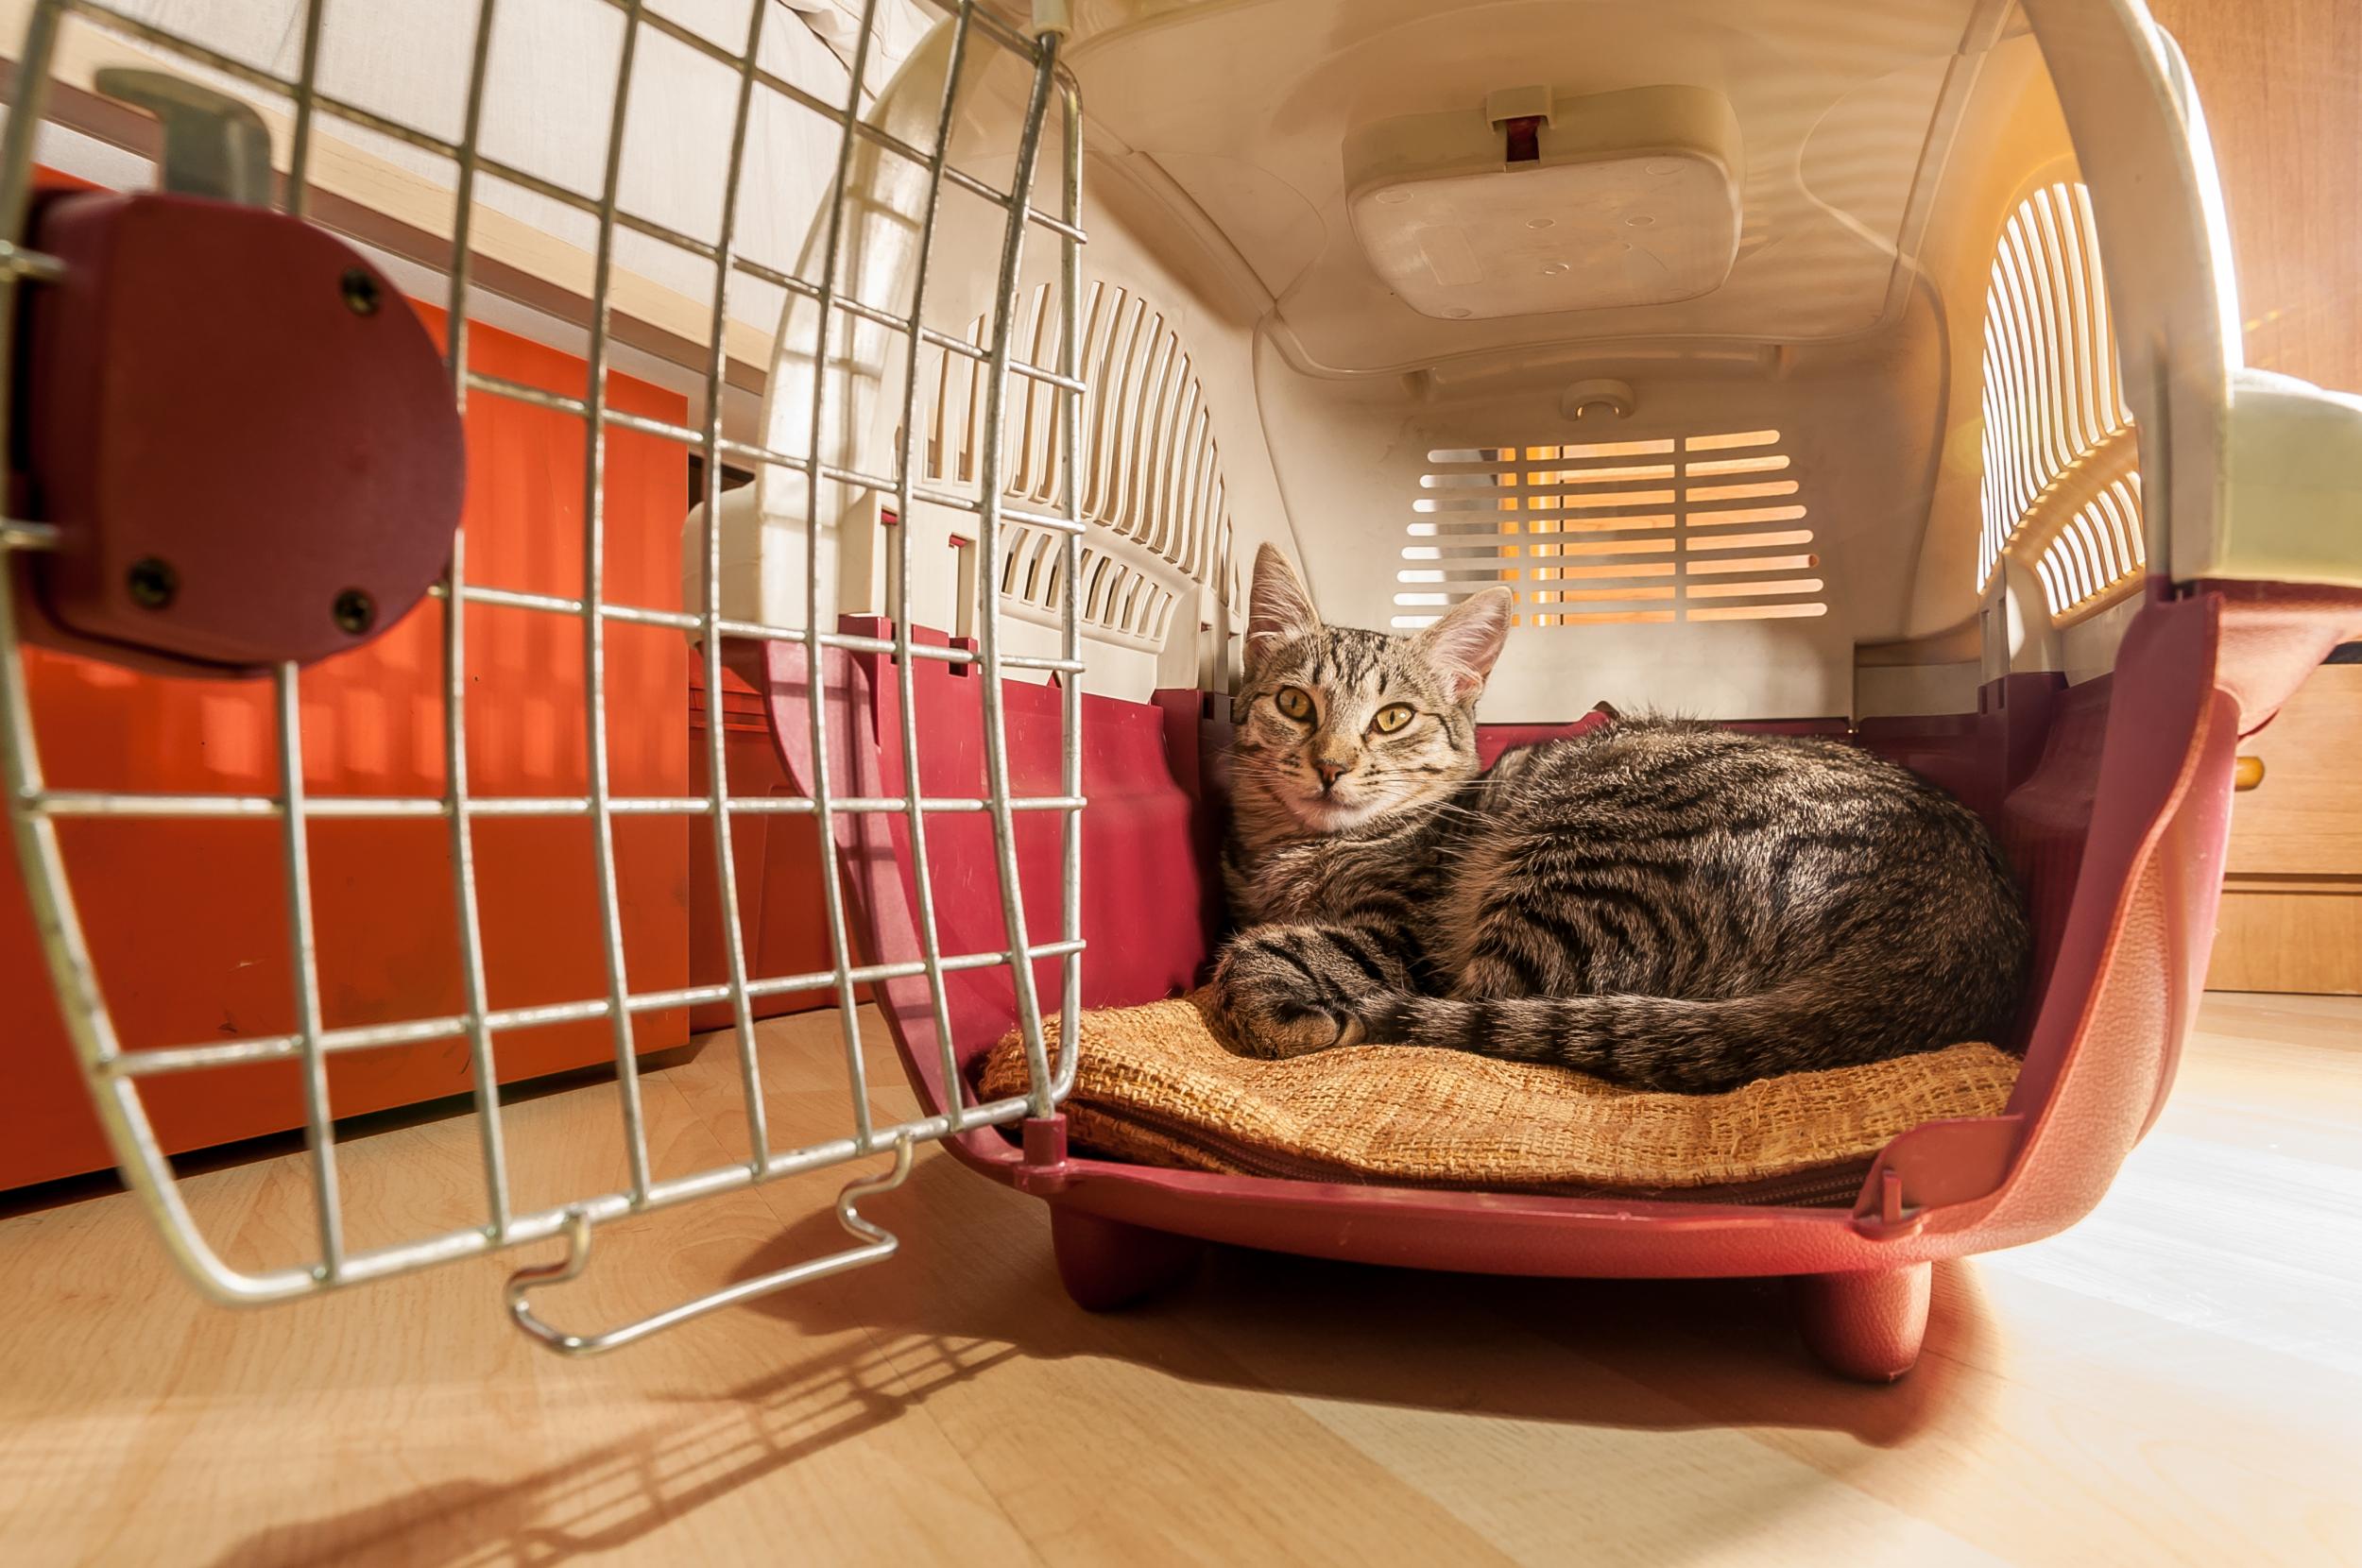 If you want to travel with your pet beyond 30 March, it’s recommended you take it to the vet immediately